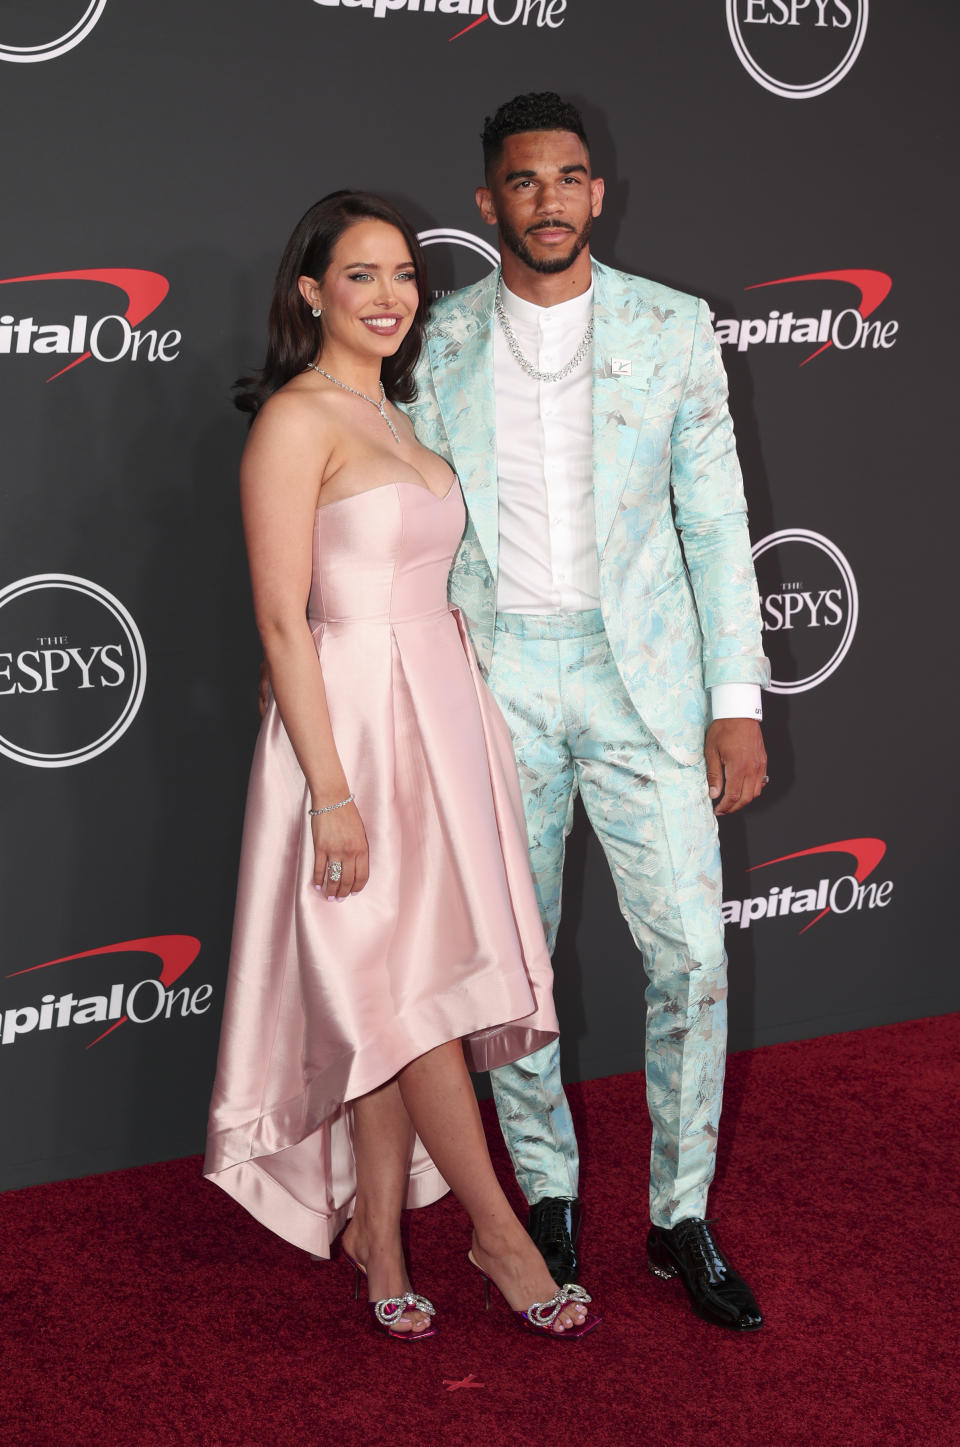 Mara Teigen and Evander Kane at The 2022 ESPYS held at the Dolby Theatre on July 20, 2022 in Los Angeles, California, USA. Photo by Christopher Polk/Variety. - Credit: Variety